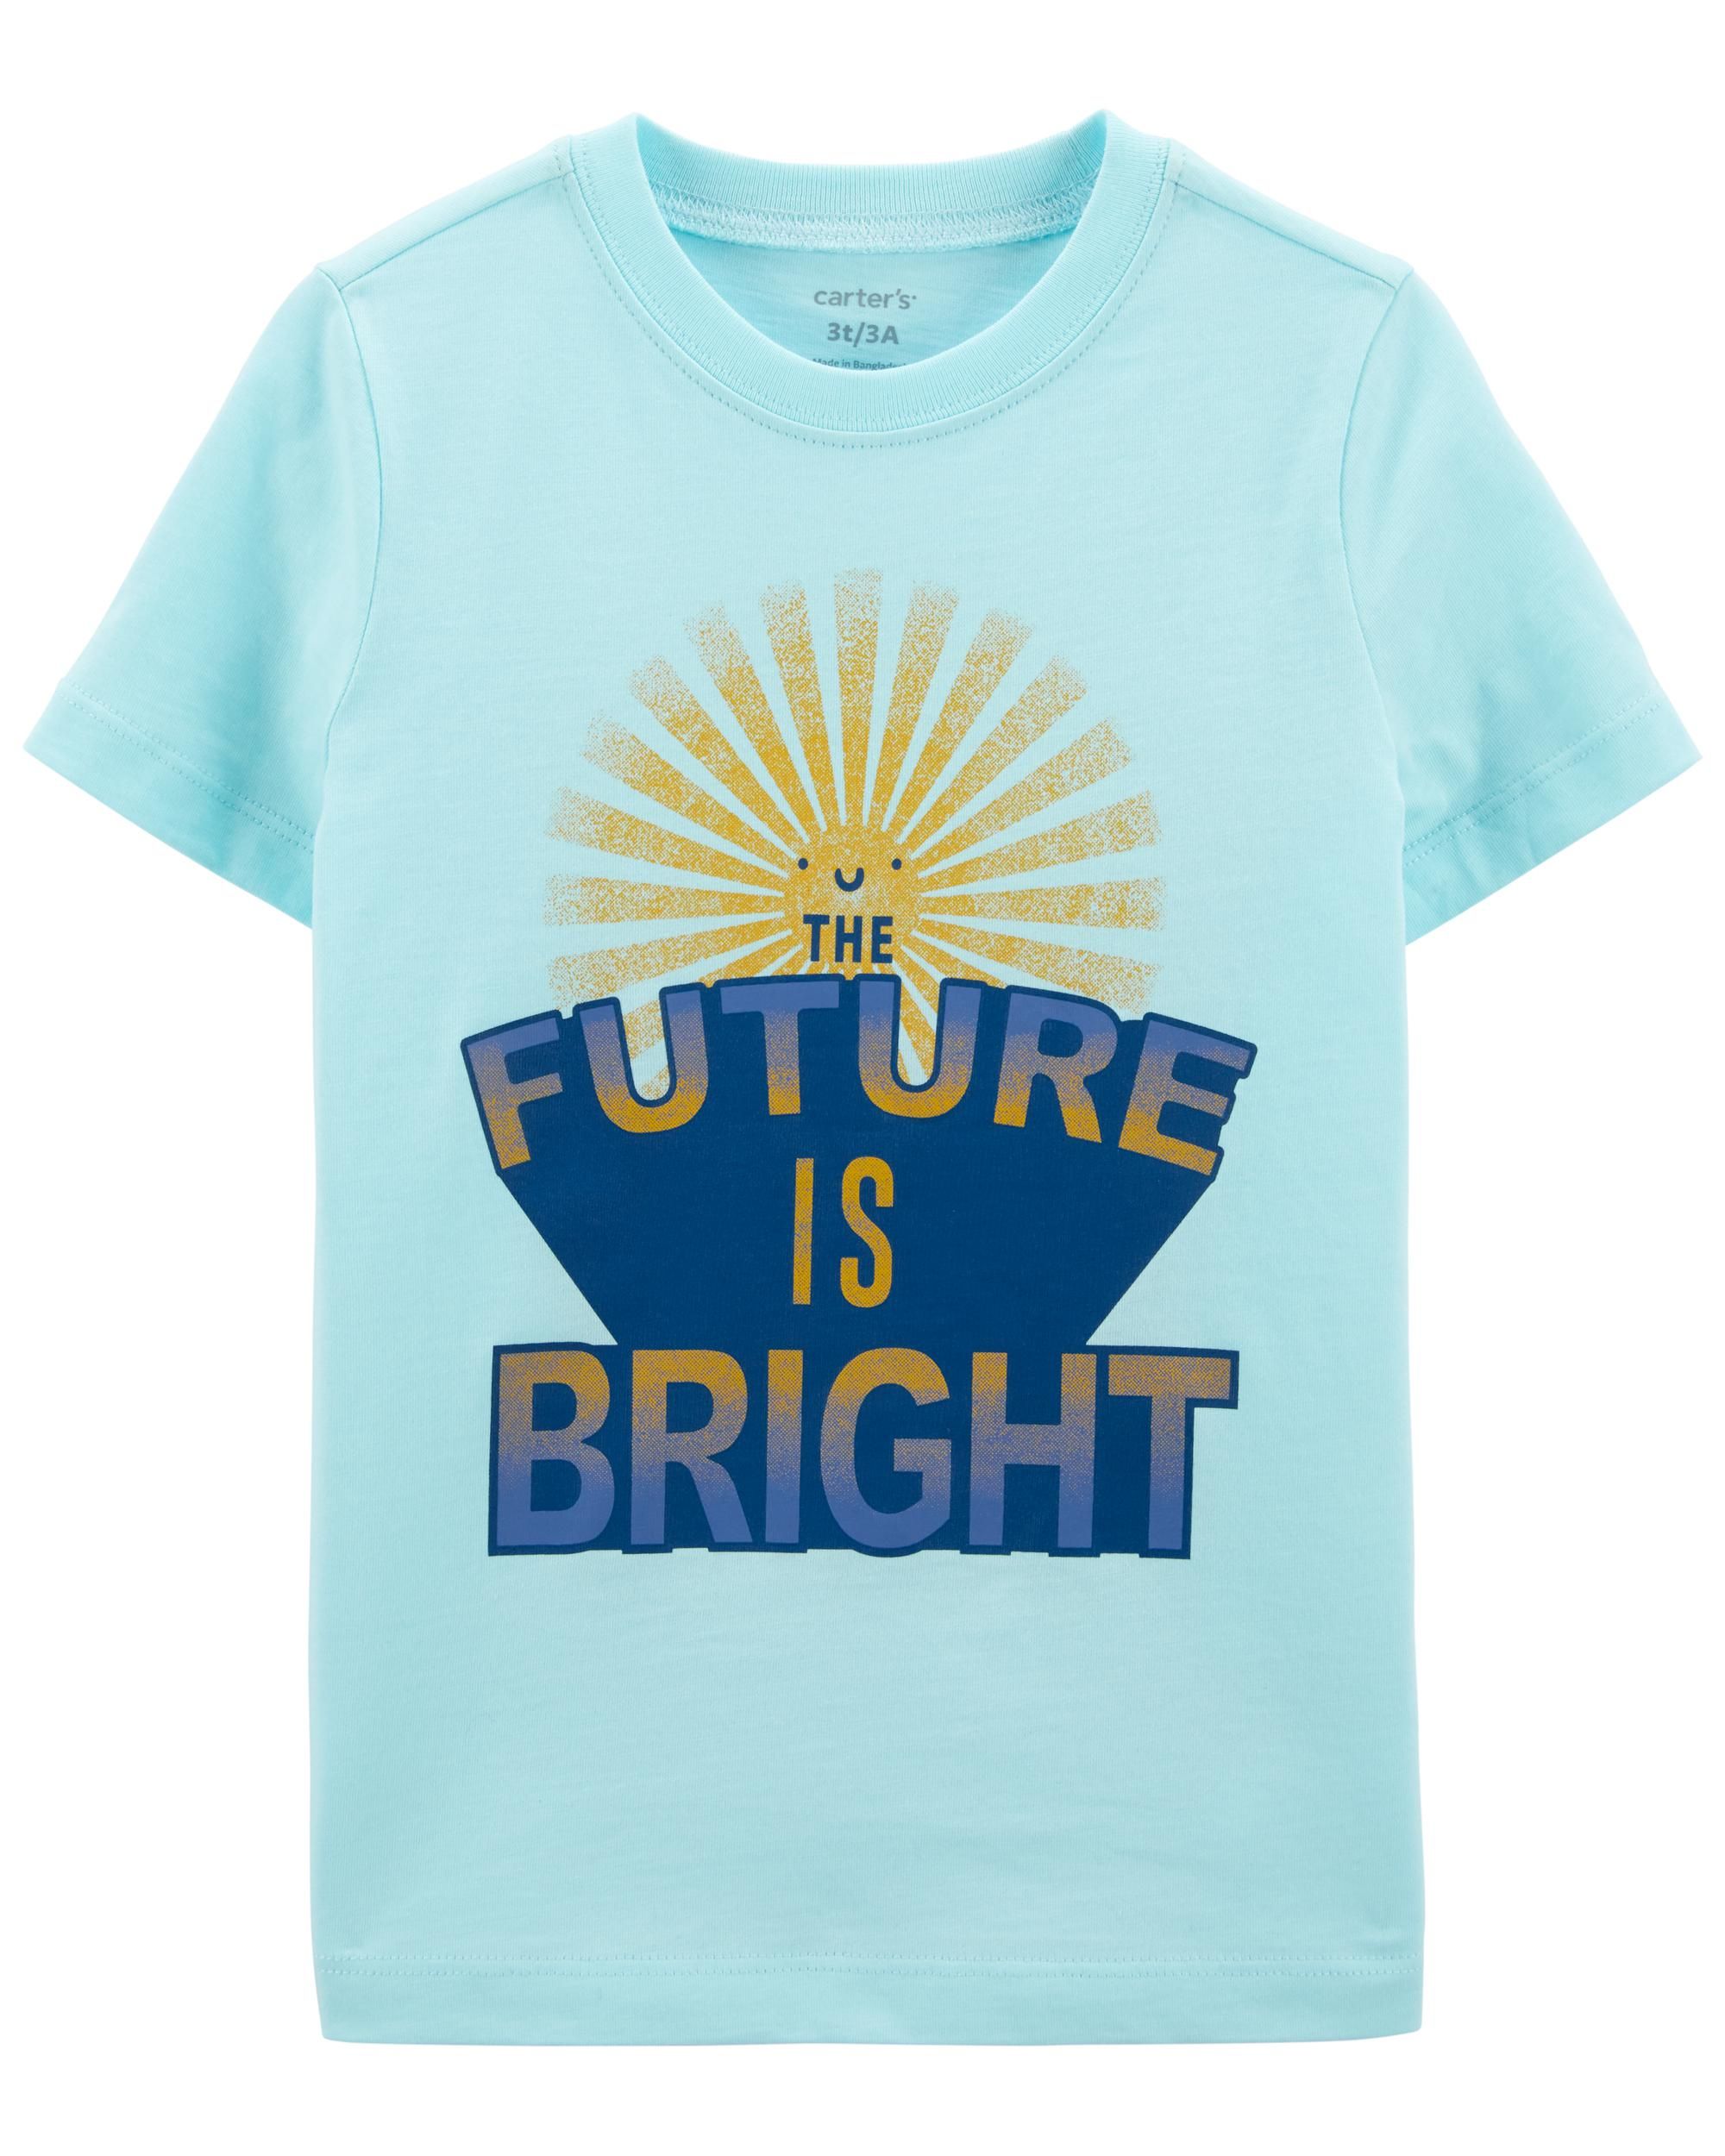 Future Is Bright Jersey Tee | Carter's